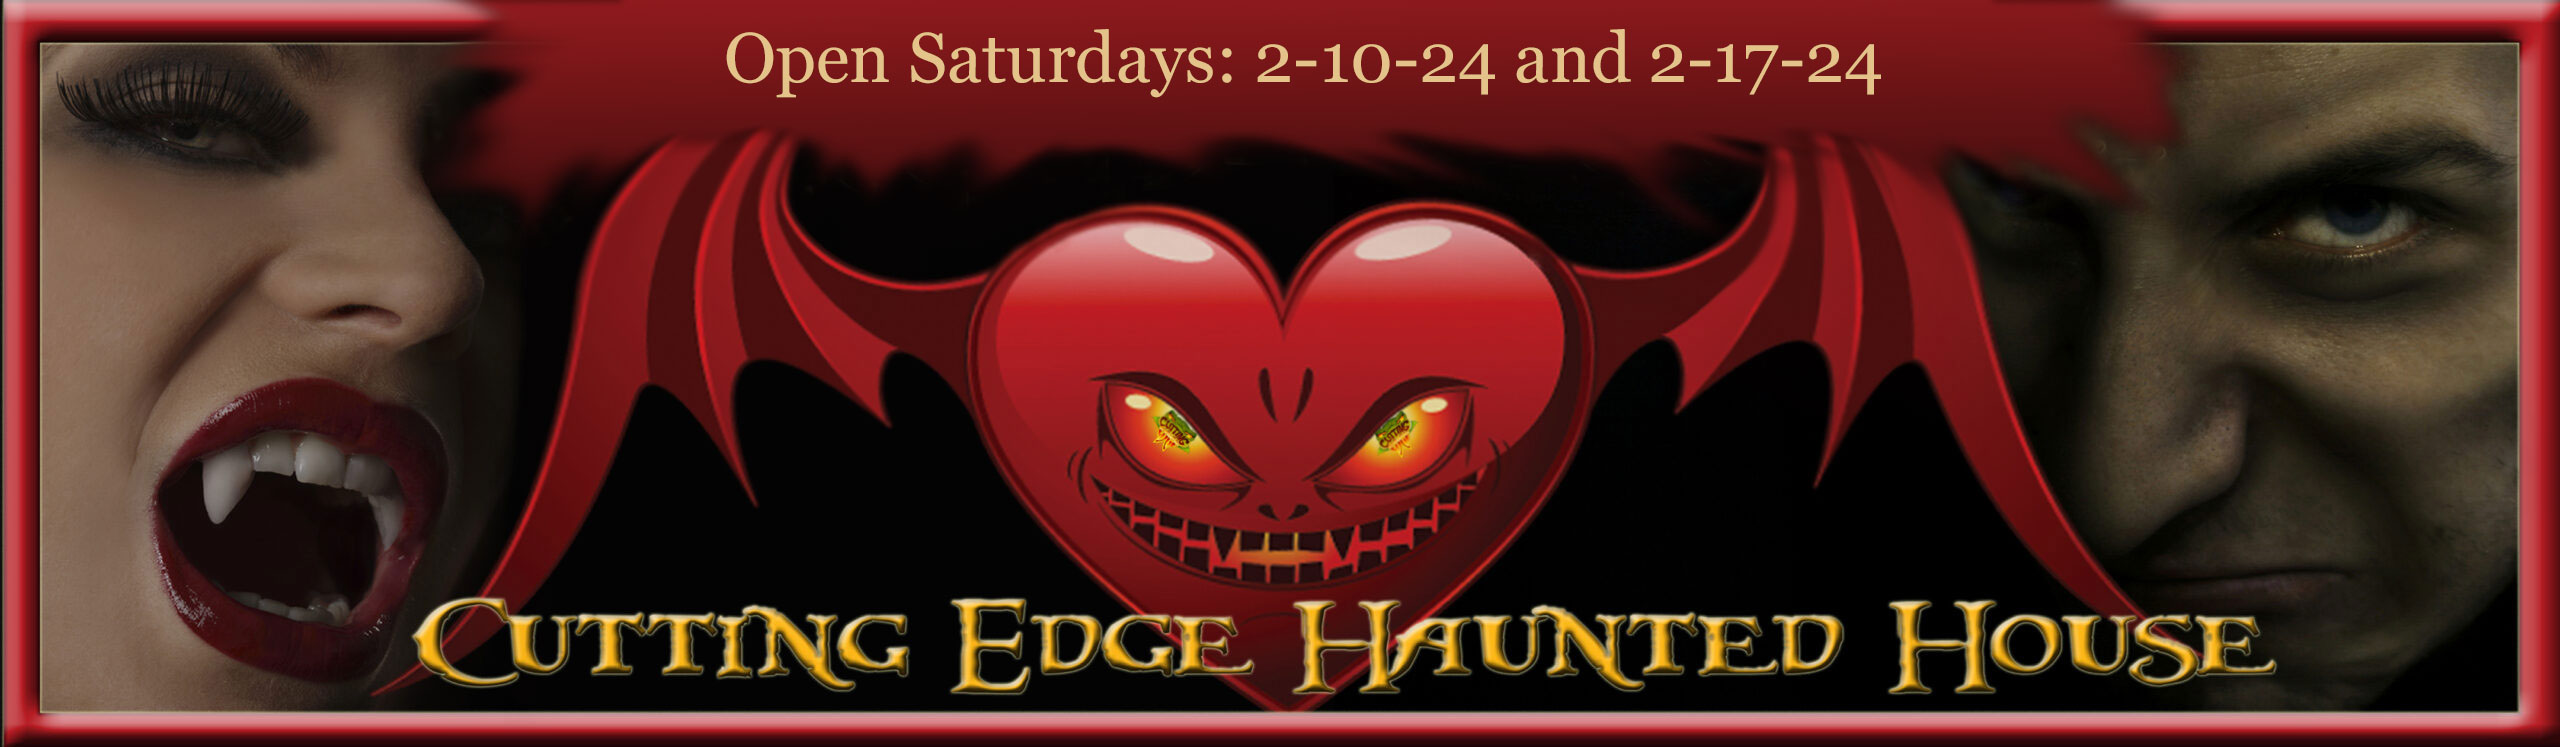 Cutting Edge Haunted House Open Saturday 2/10 and Saturday 2/17, 2024!